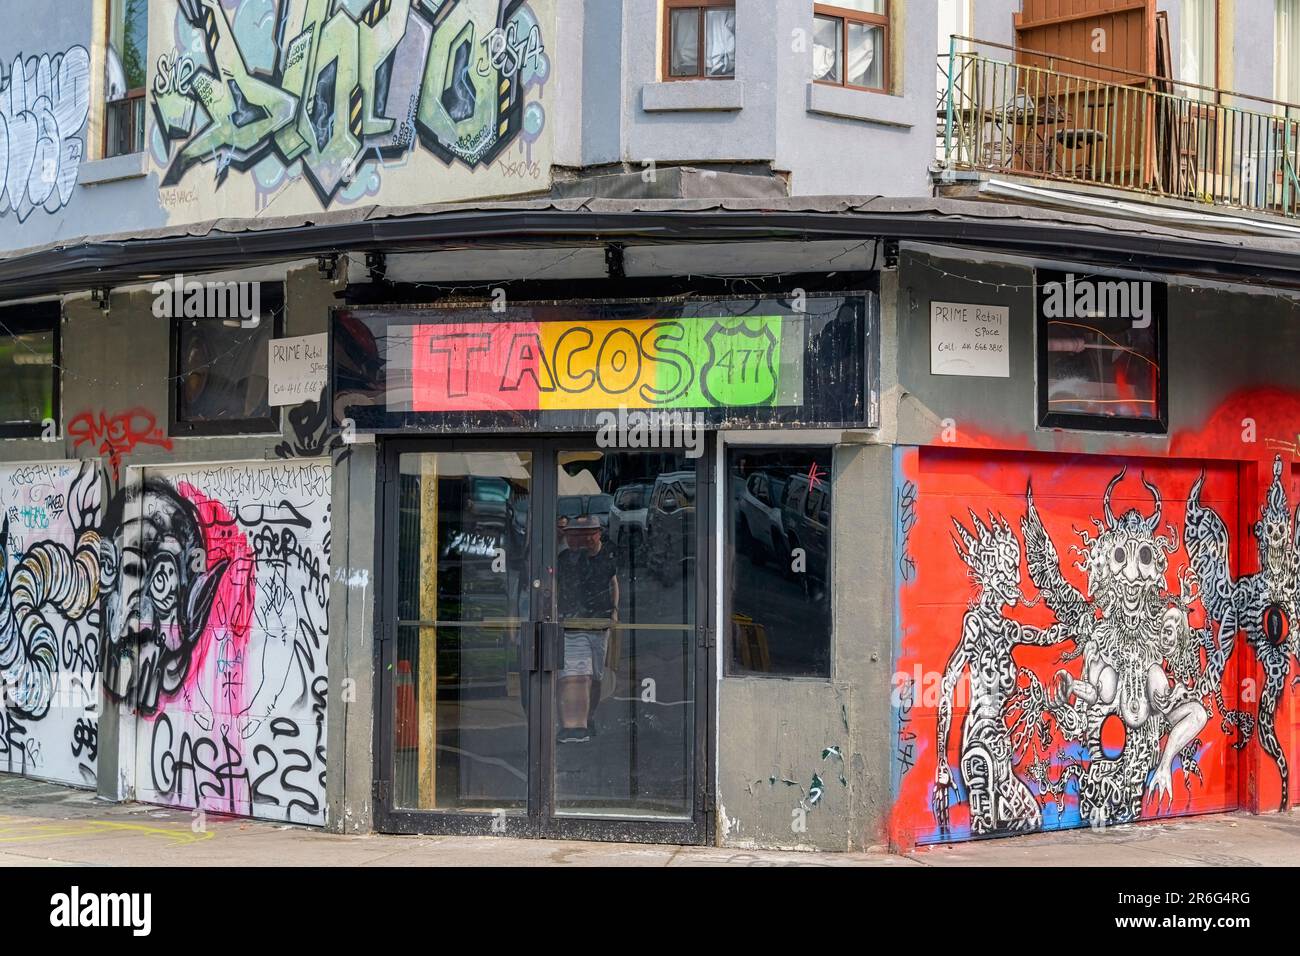 Toronto, Canada - June 4, 2023: Kensington Market. An old building with the signage 'TACOS 477'. Colorful witch monster art is on the building's wall. Stock Photo